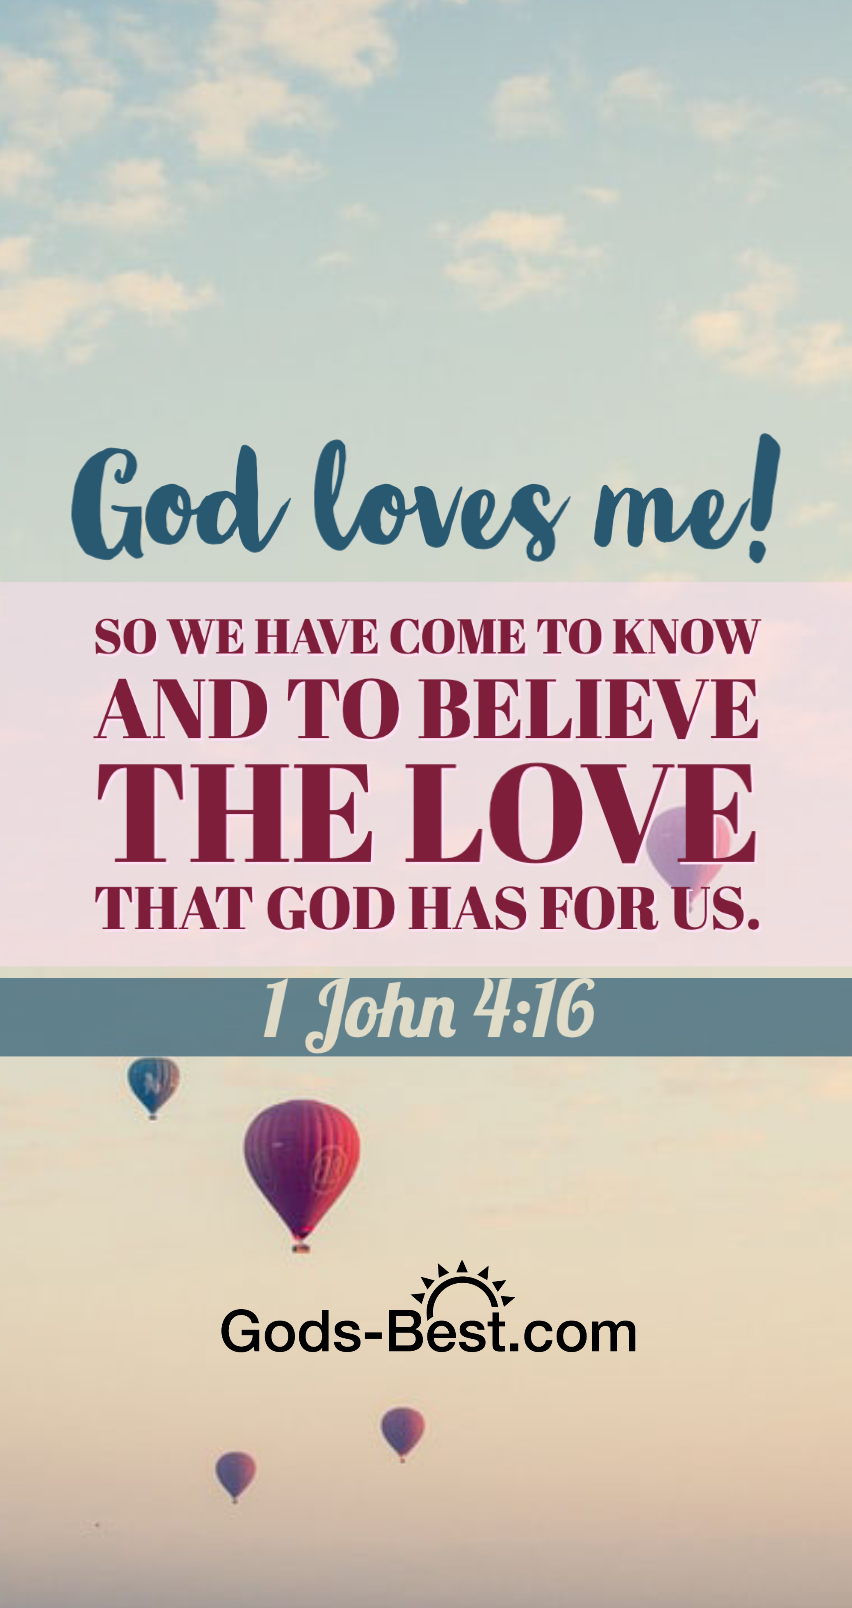 Believe In God's Love - Free Phone and Desktop Wallpapers - God's Best for  Your Life!